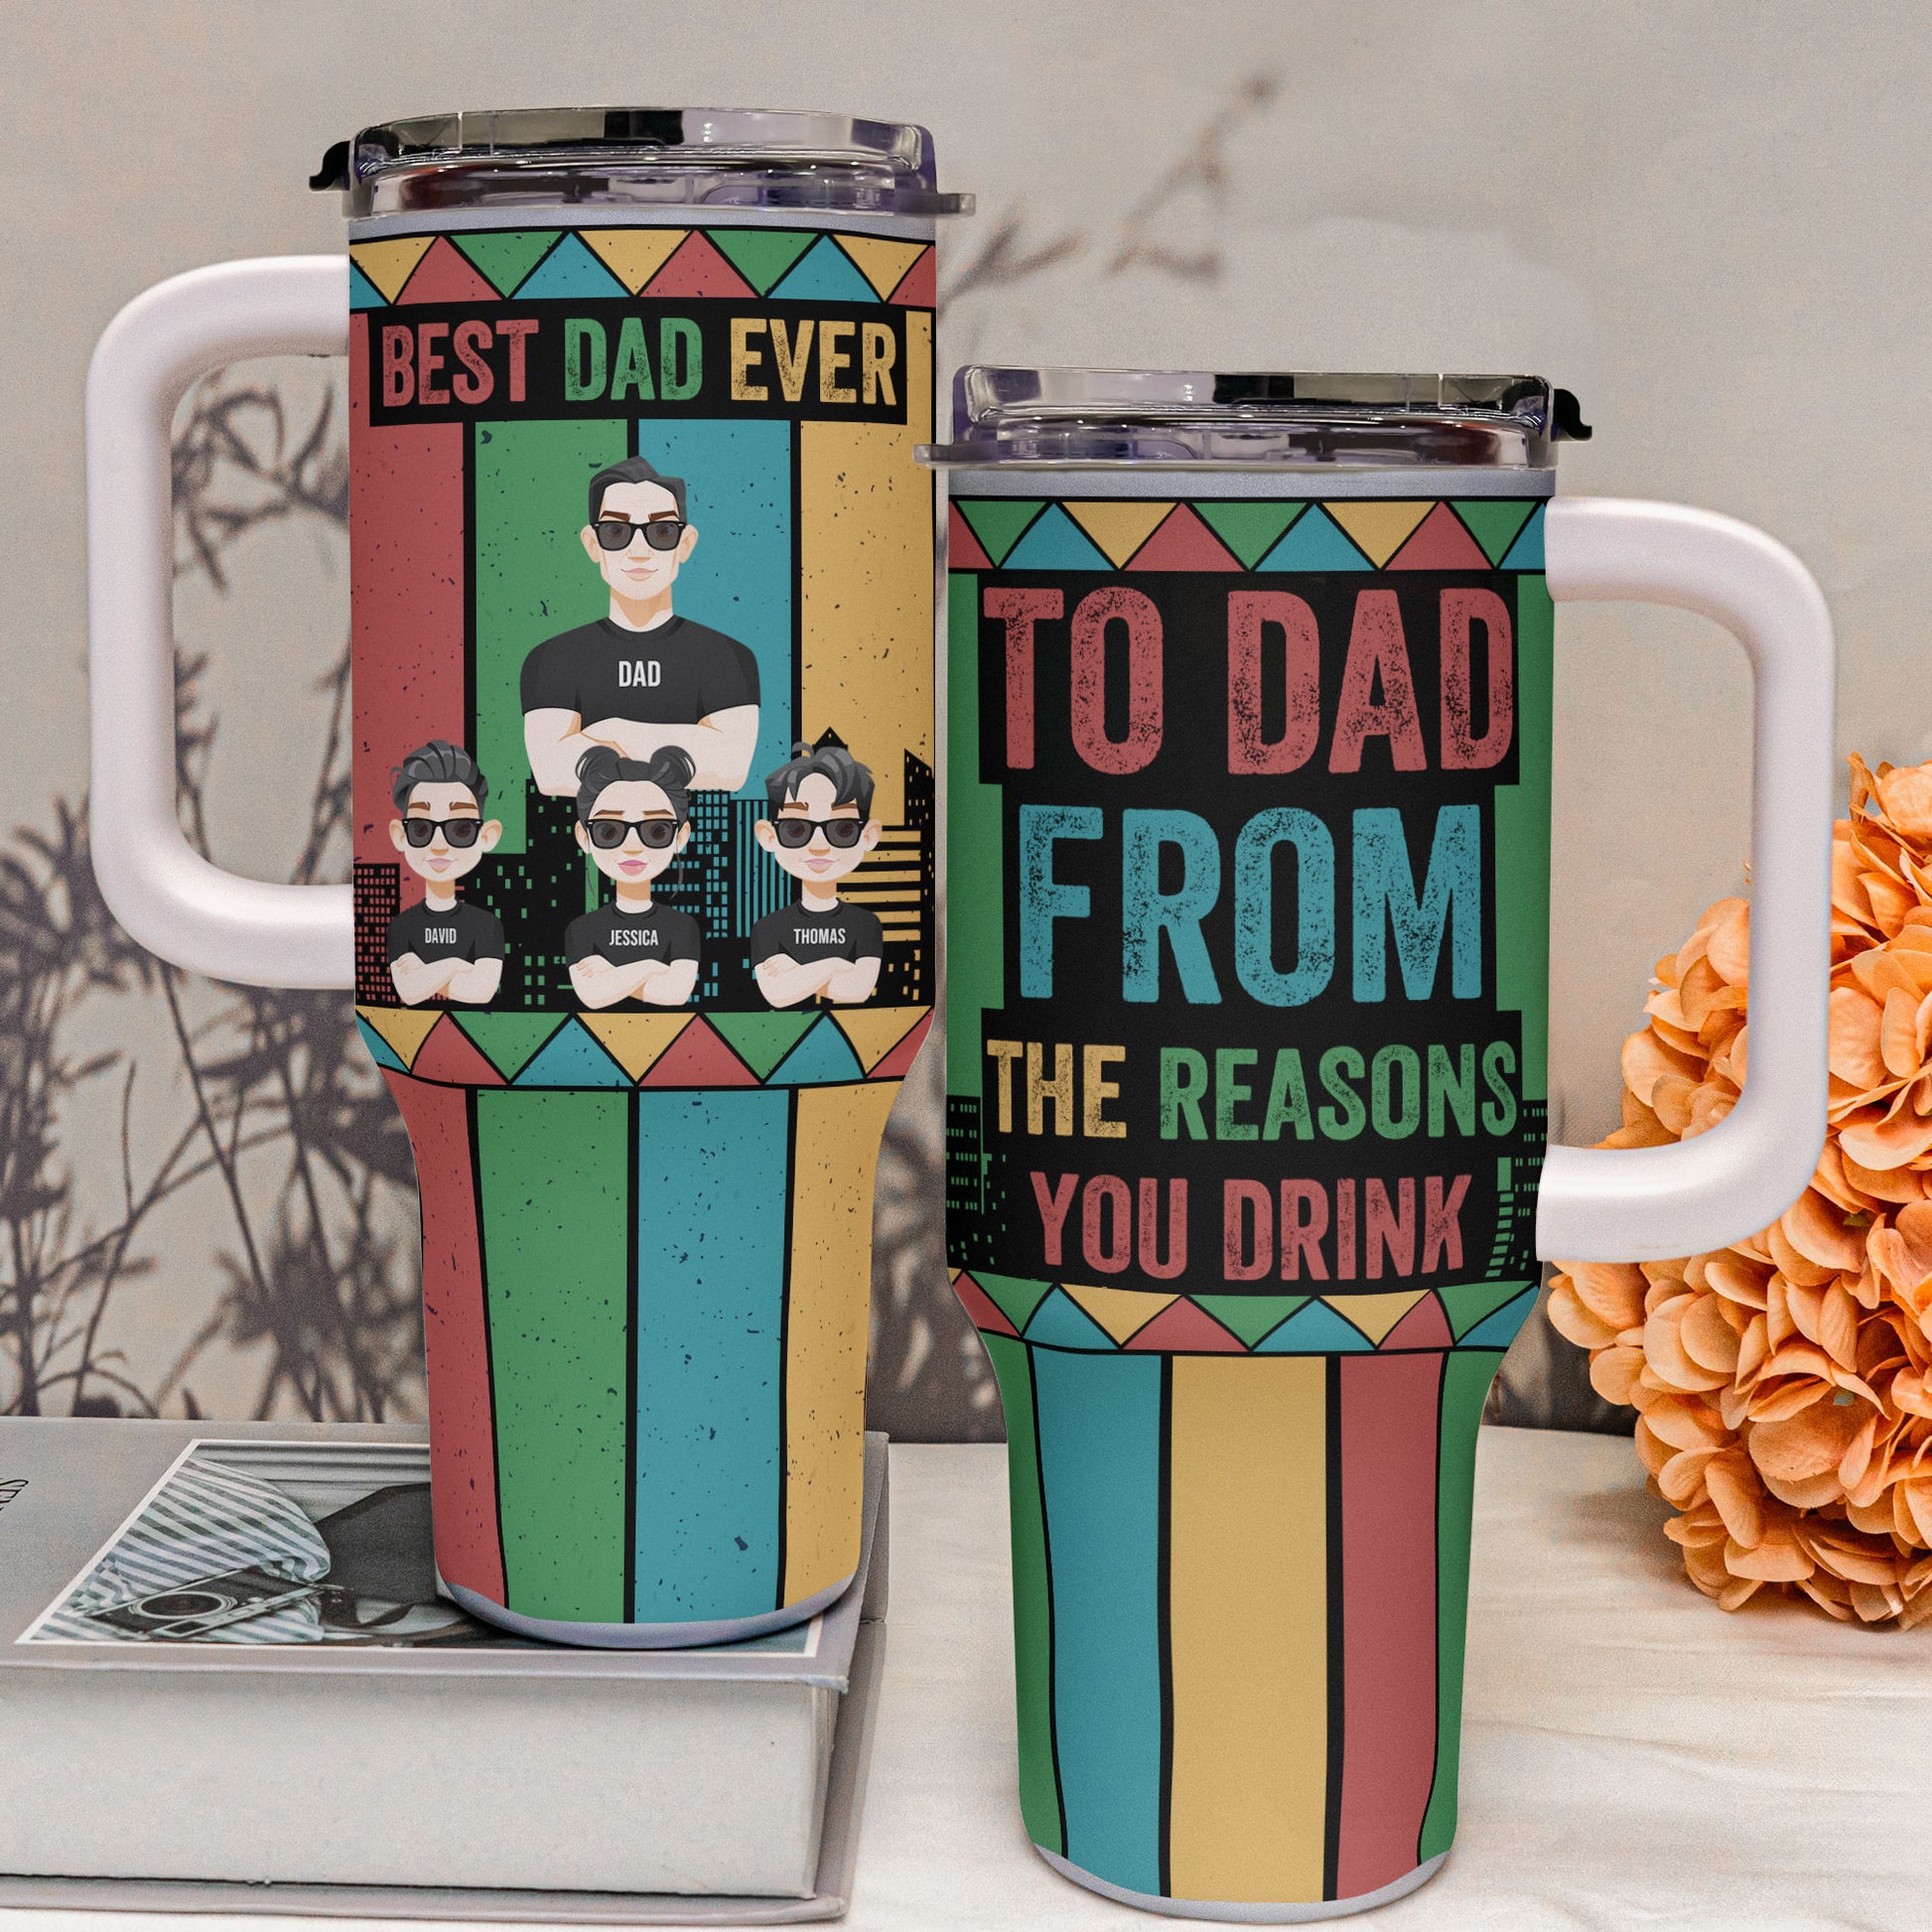 To Best Dad From The Reasons You Drink - Personalized 40oz Tumbler With Straw